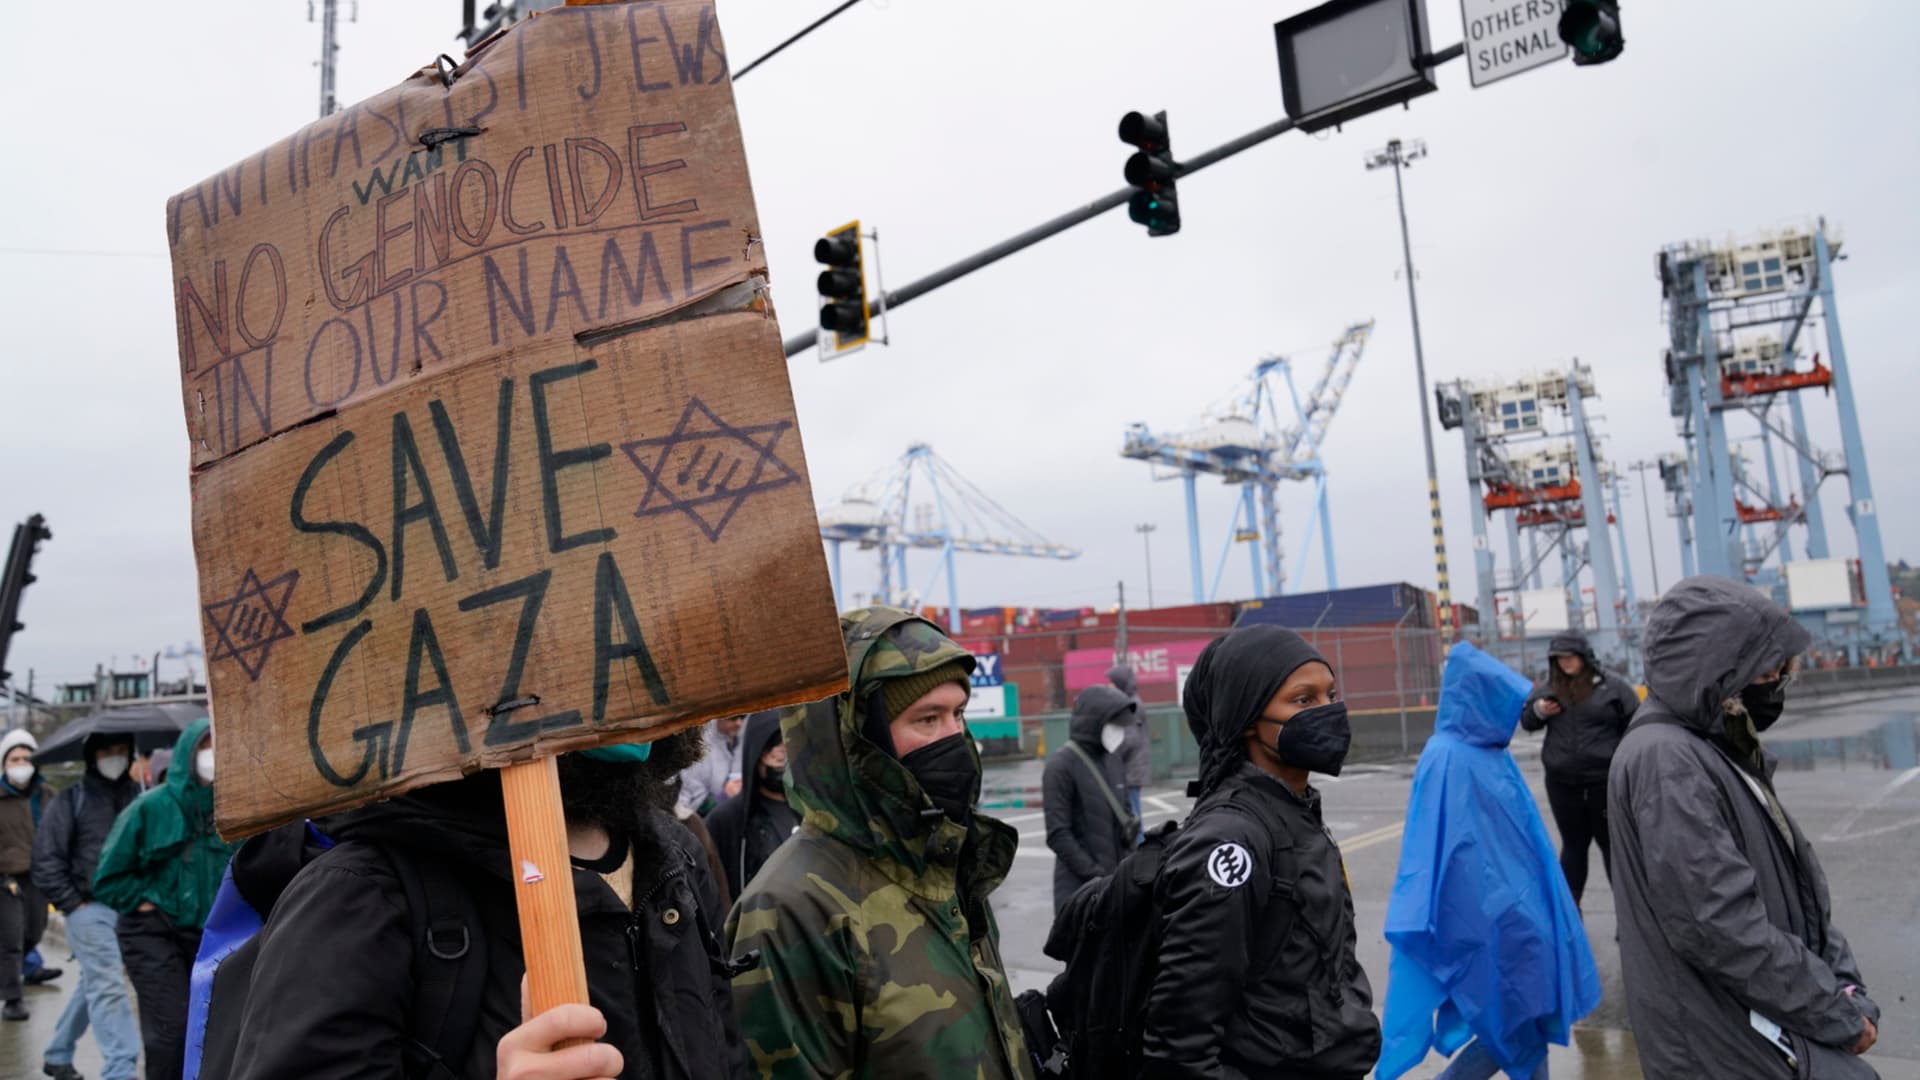 Pro-Palestinian protesters block access to an entry point at the Port of Tacoma in Tacoma, Washington, US, on Monday, Nov. 6, 2023. The protesters are demonstrating what they believe is a military supply ship that is docked at the port and bound for Israel, according to the Seattle Times. 